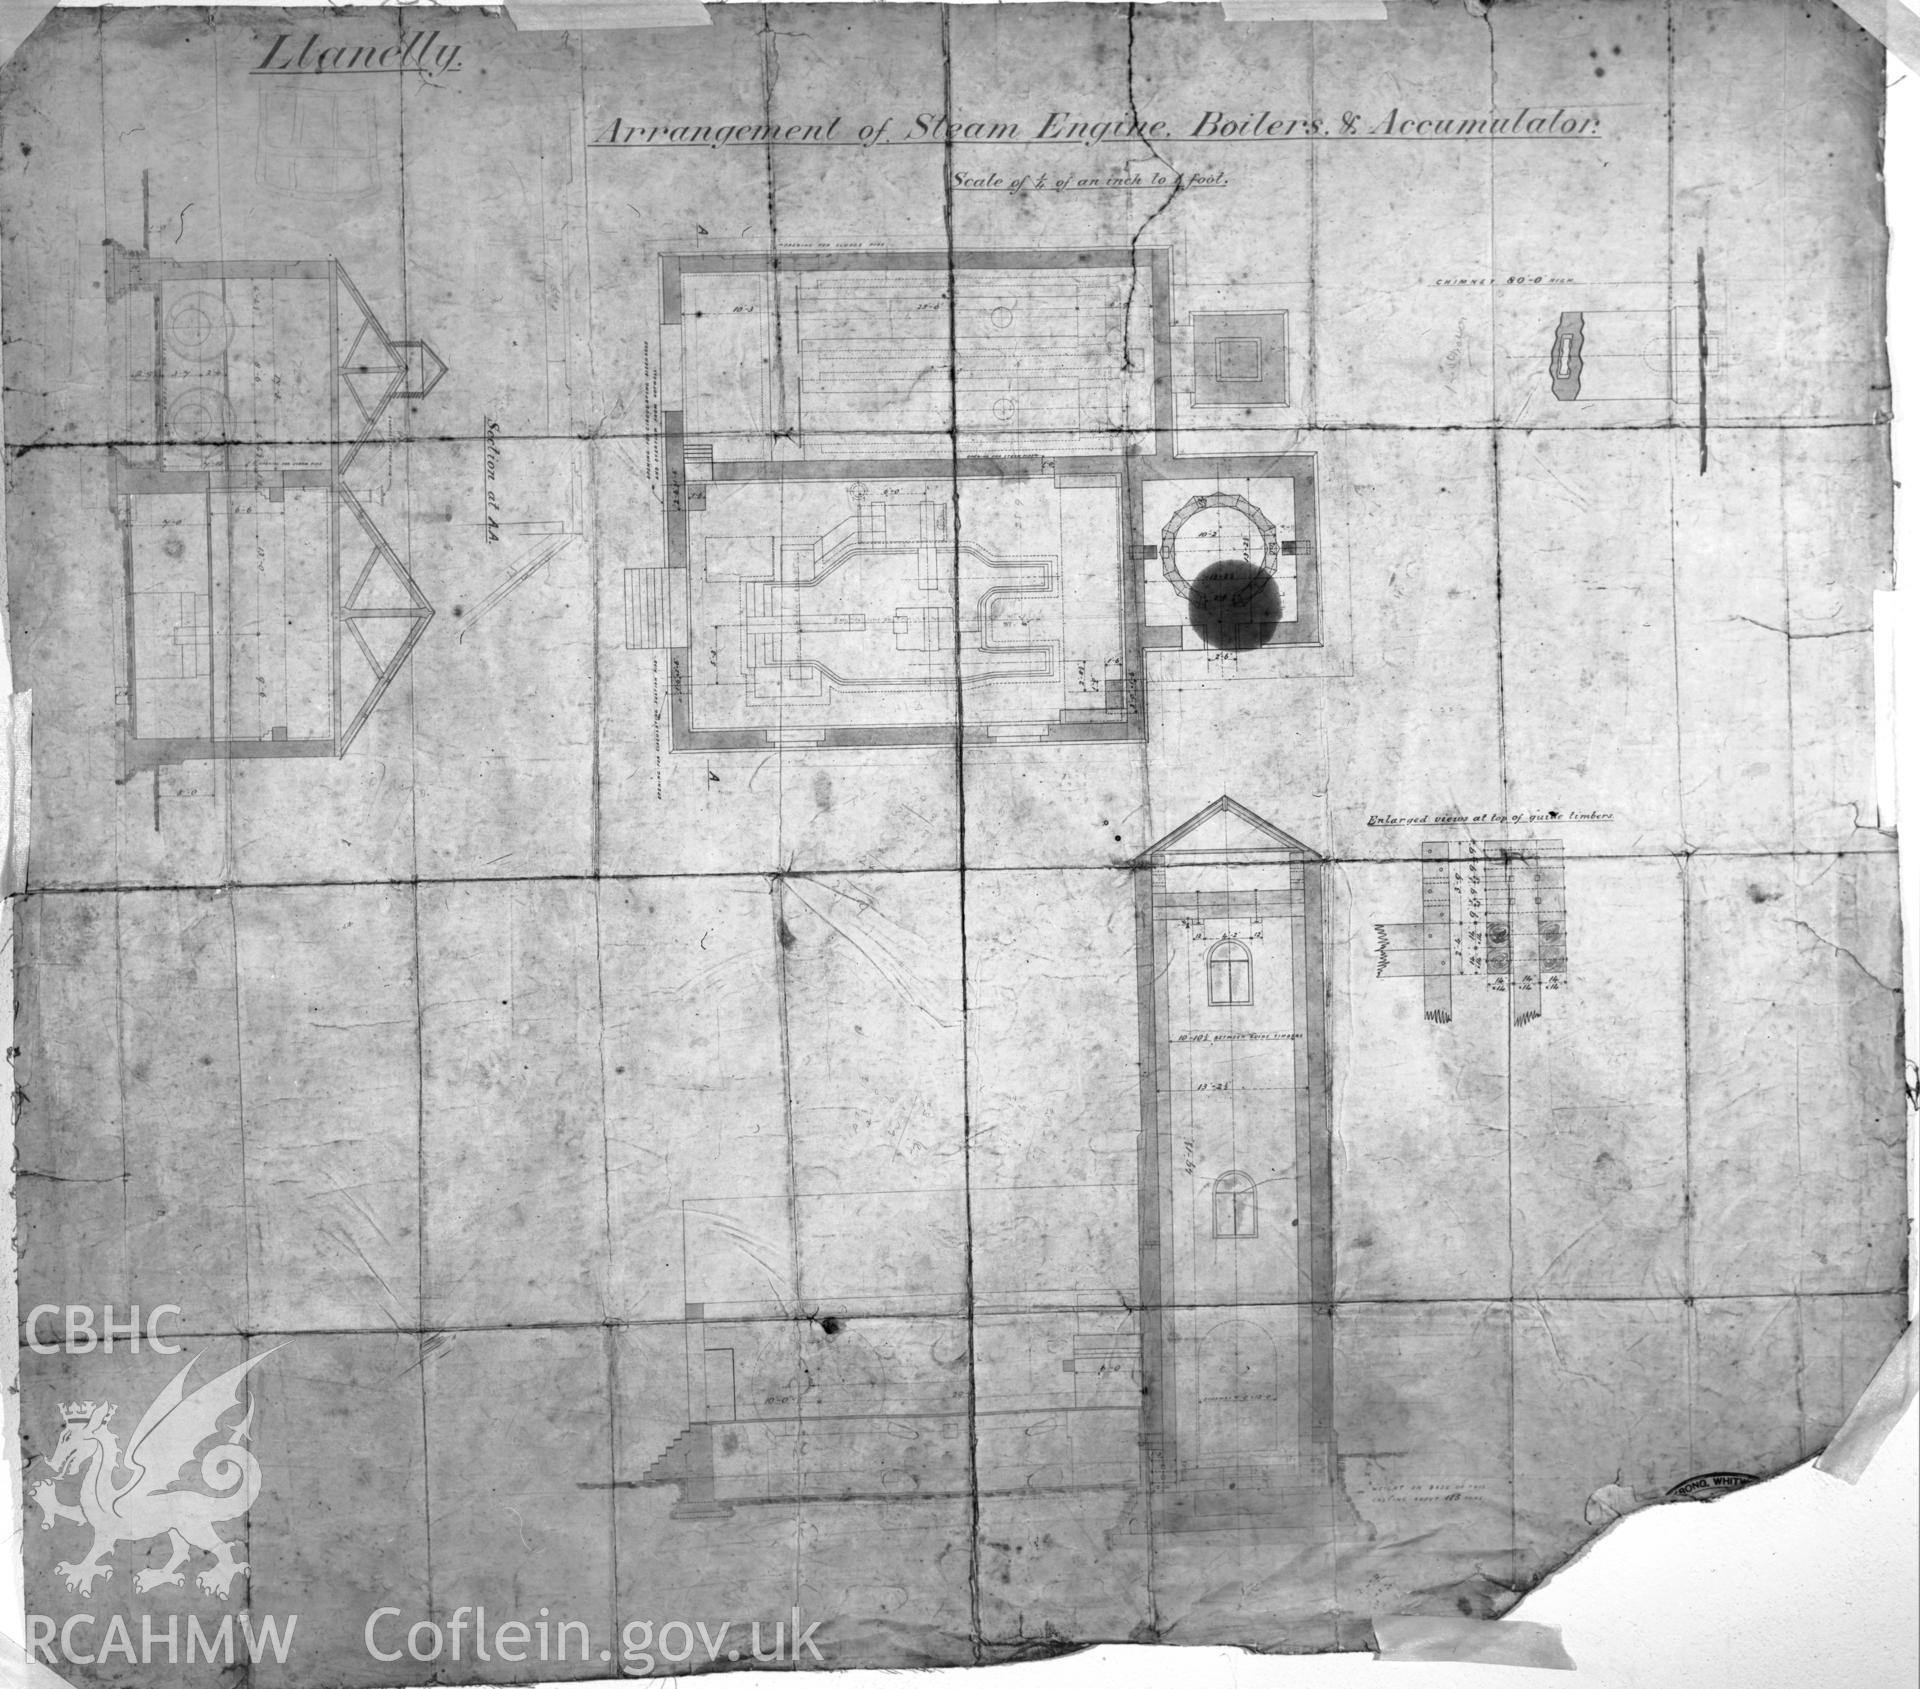 Black and white acetate negative showing measured drawing of a steam engine in an unidentified industrial building in or near Llanelli.